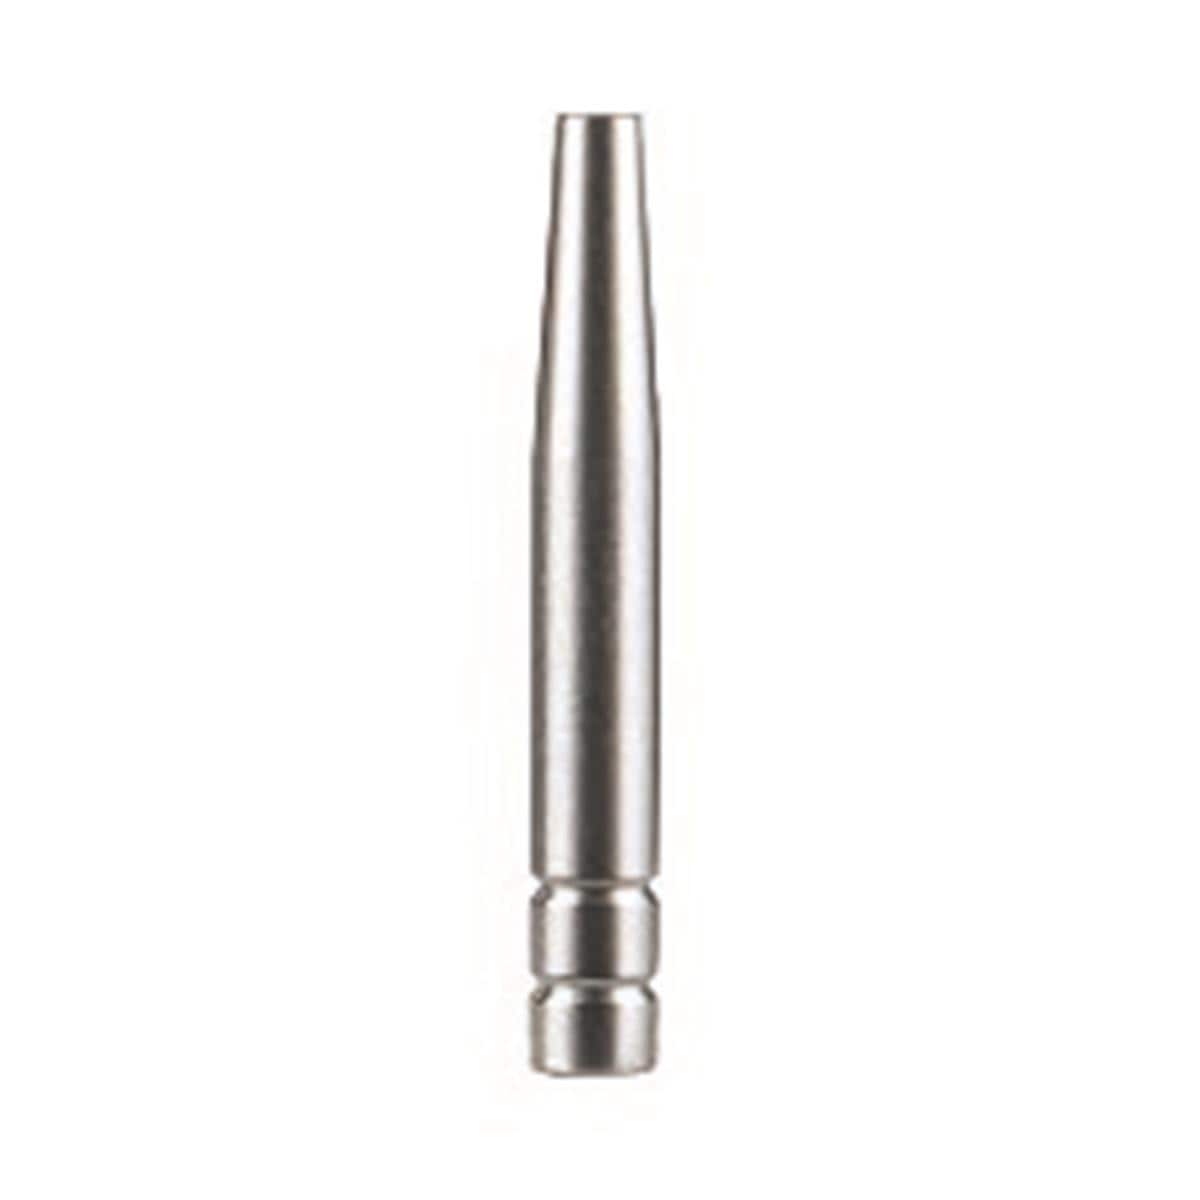 Tenons Cylindro-Coniques Inox L 11.5mm Rouge - Bote de 20 - CONNECT'IC